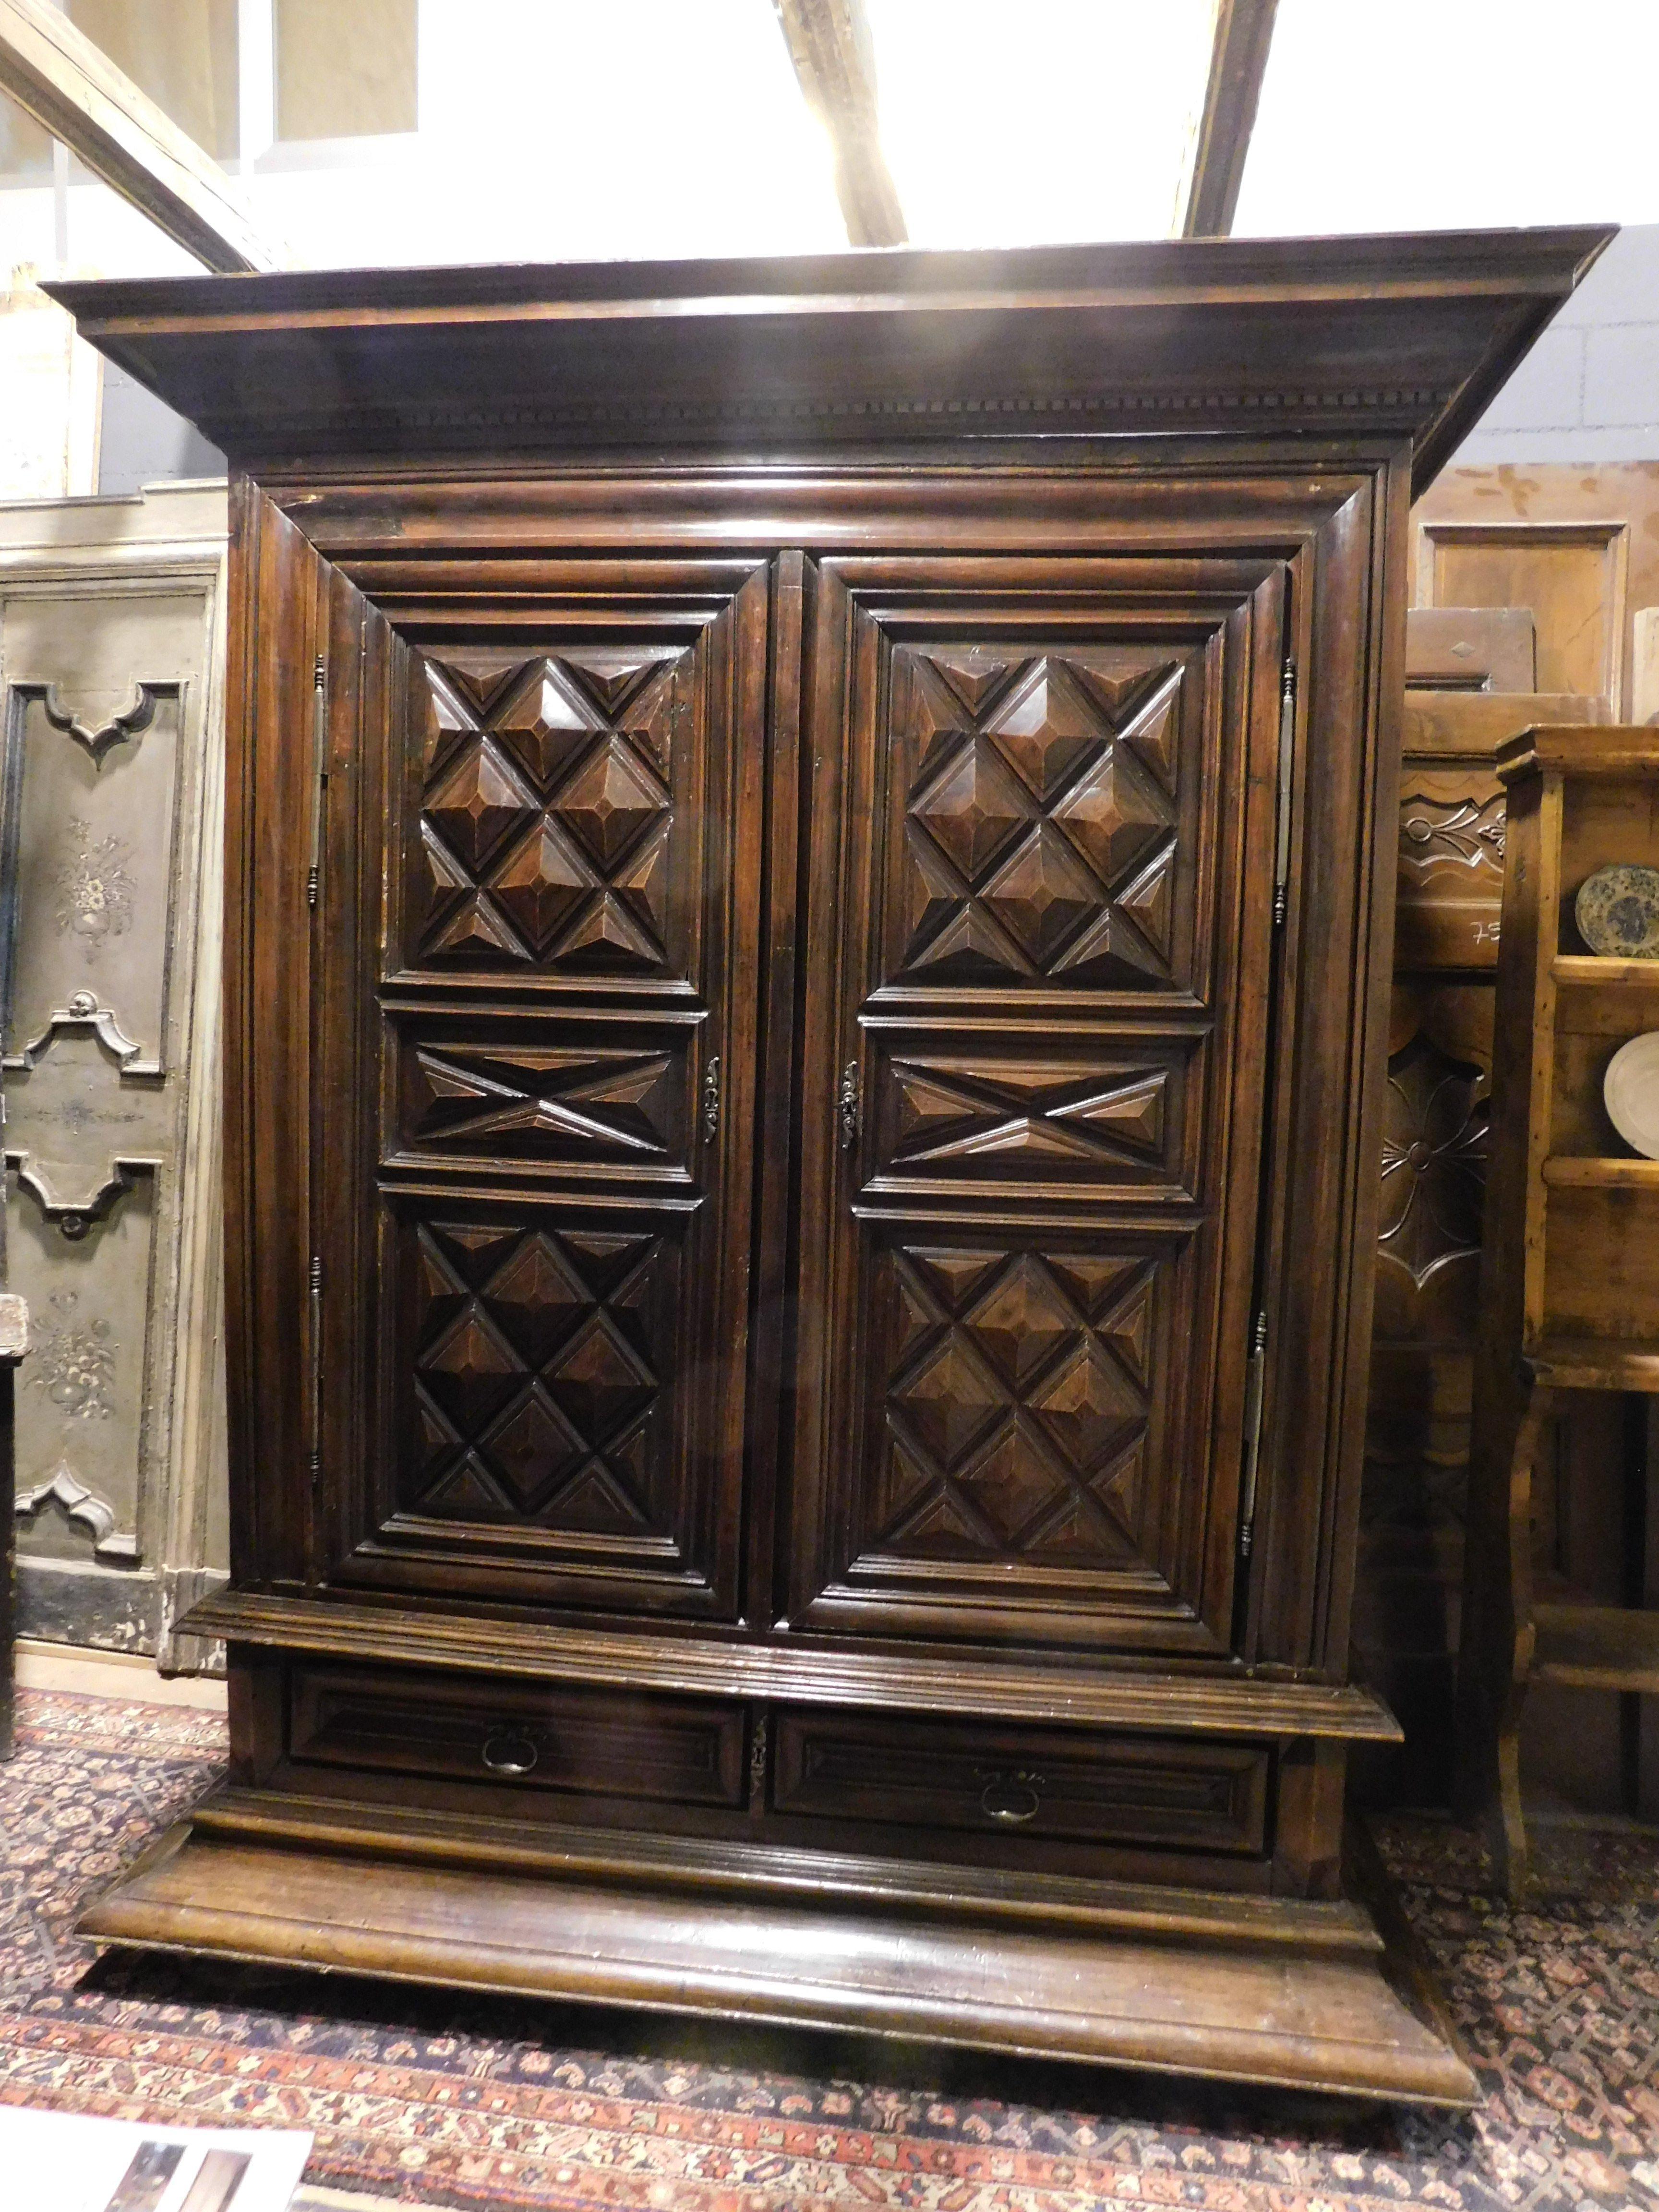 Antique sideboard wardrobe, two doors and drawer, richly hand-sculpted with diamond panels, in precious solid walnut wood, rear linings replaced and therefore in excellent state of conservation, built in the 1600s, for an important noble family